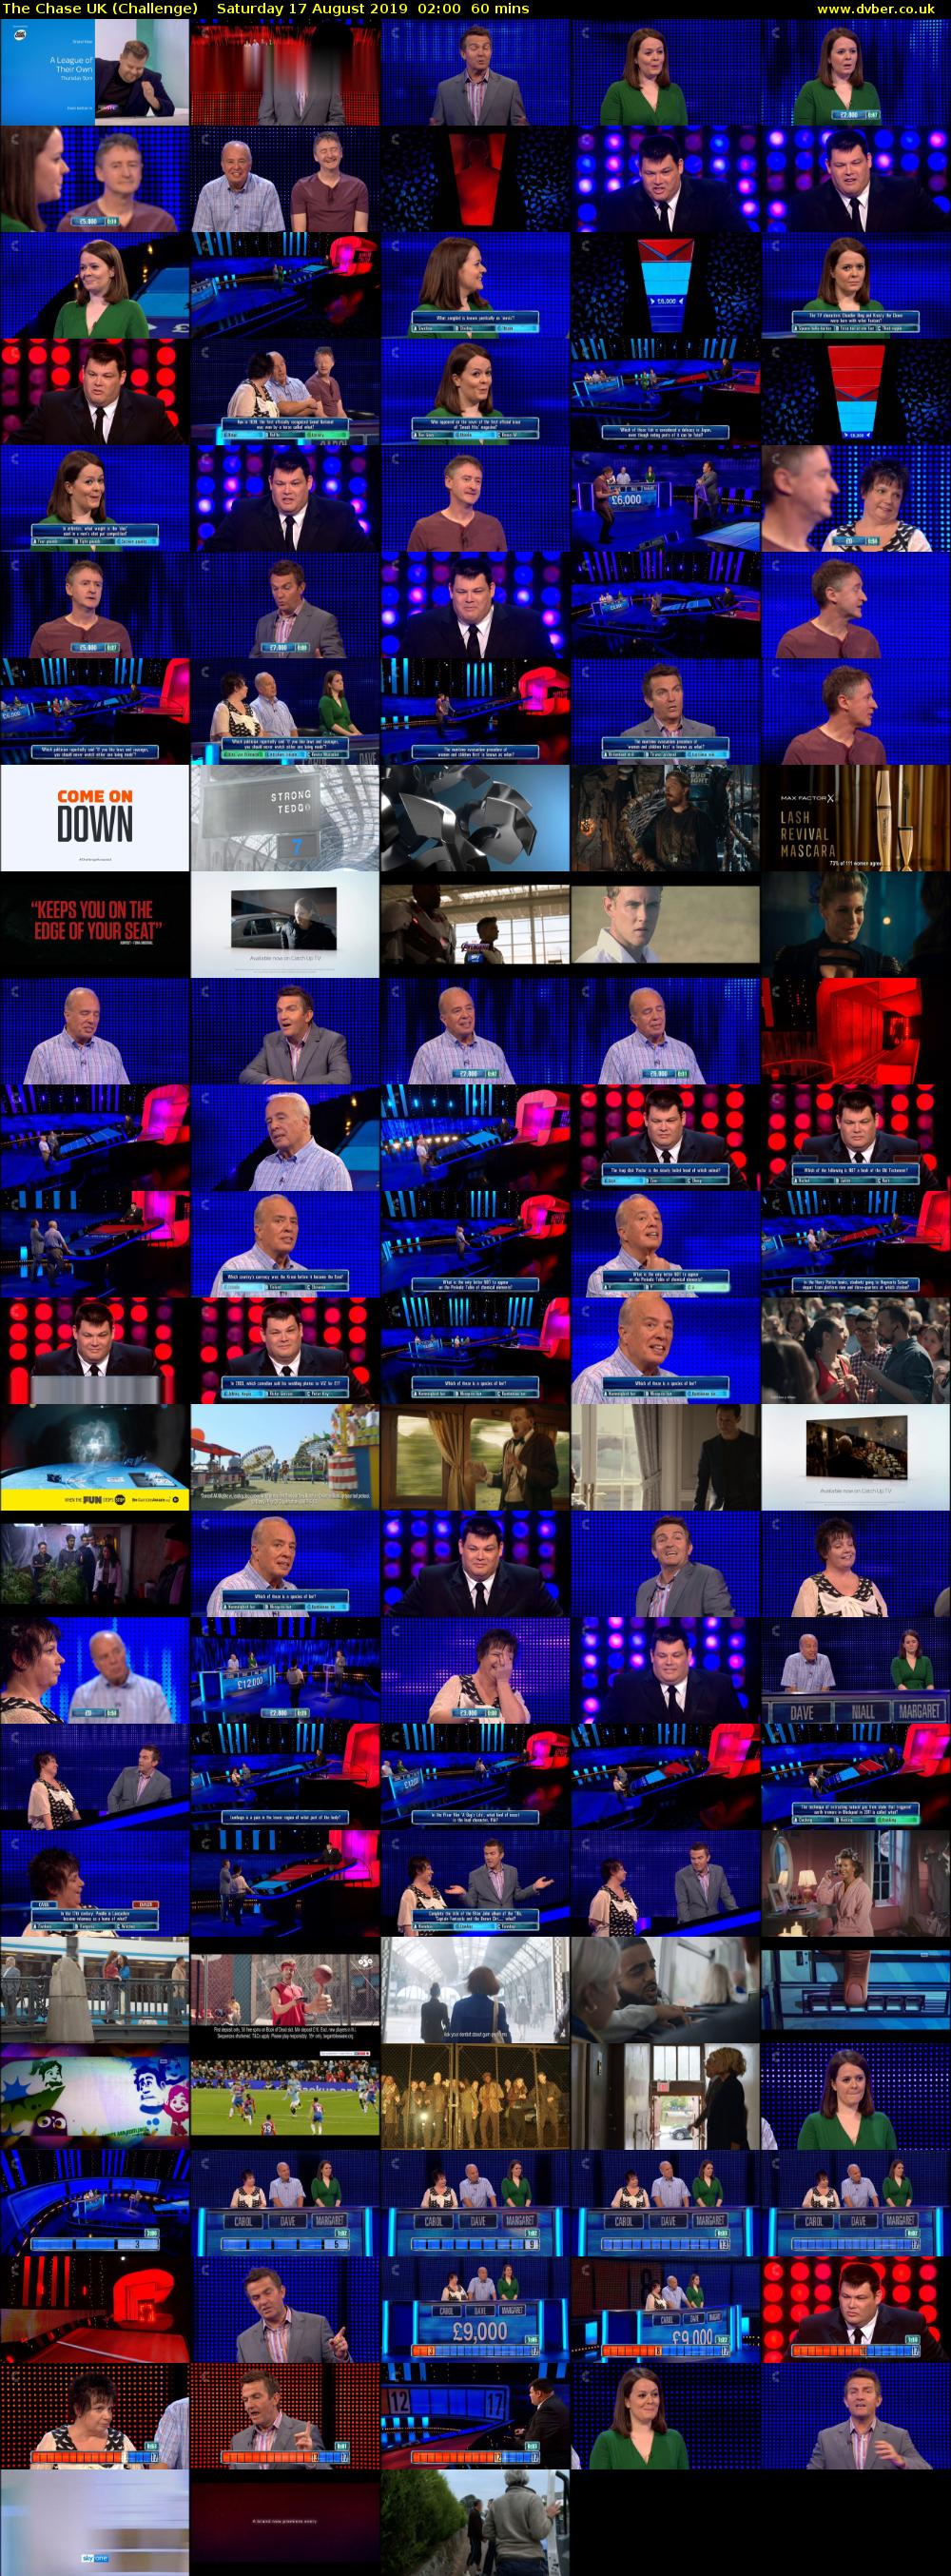 The Chase UK (Challenge) Saturday 17 August 2019 02:00 - 03:00